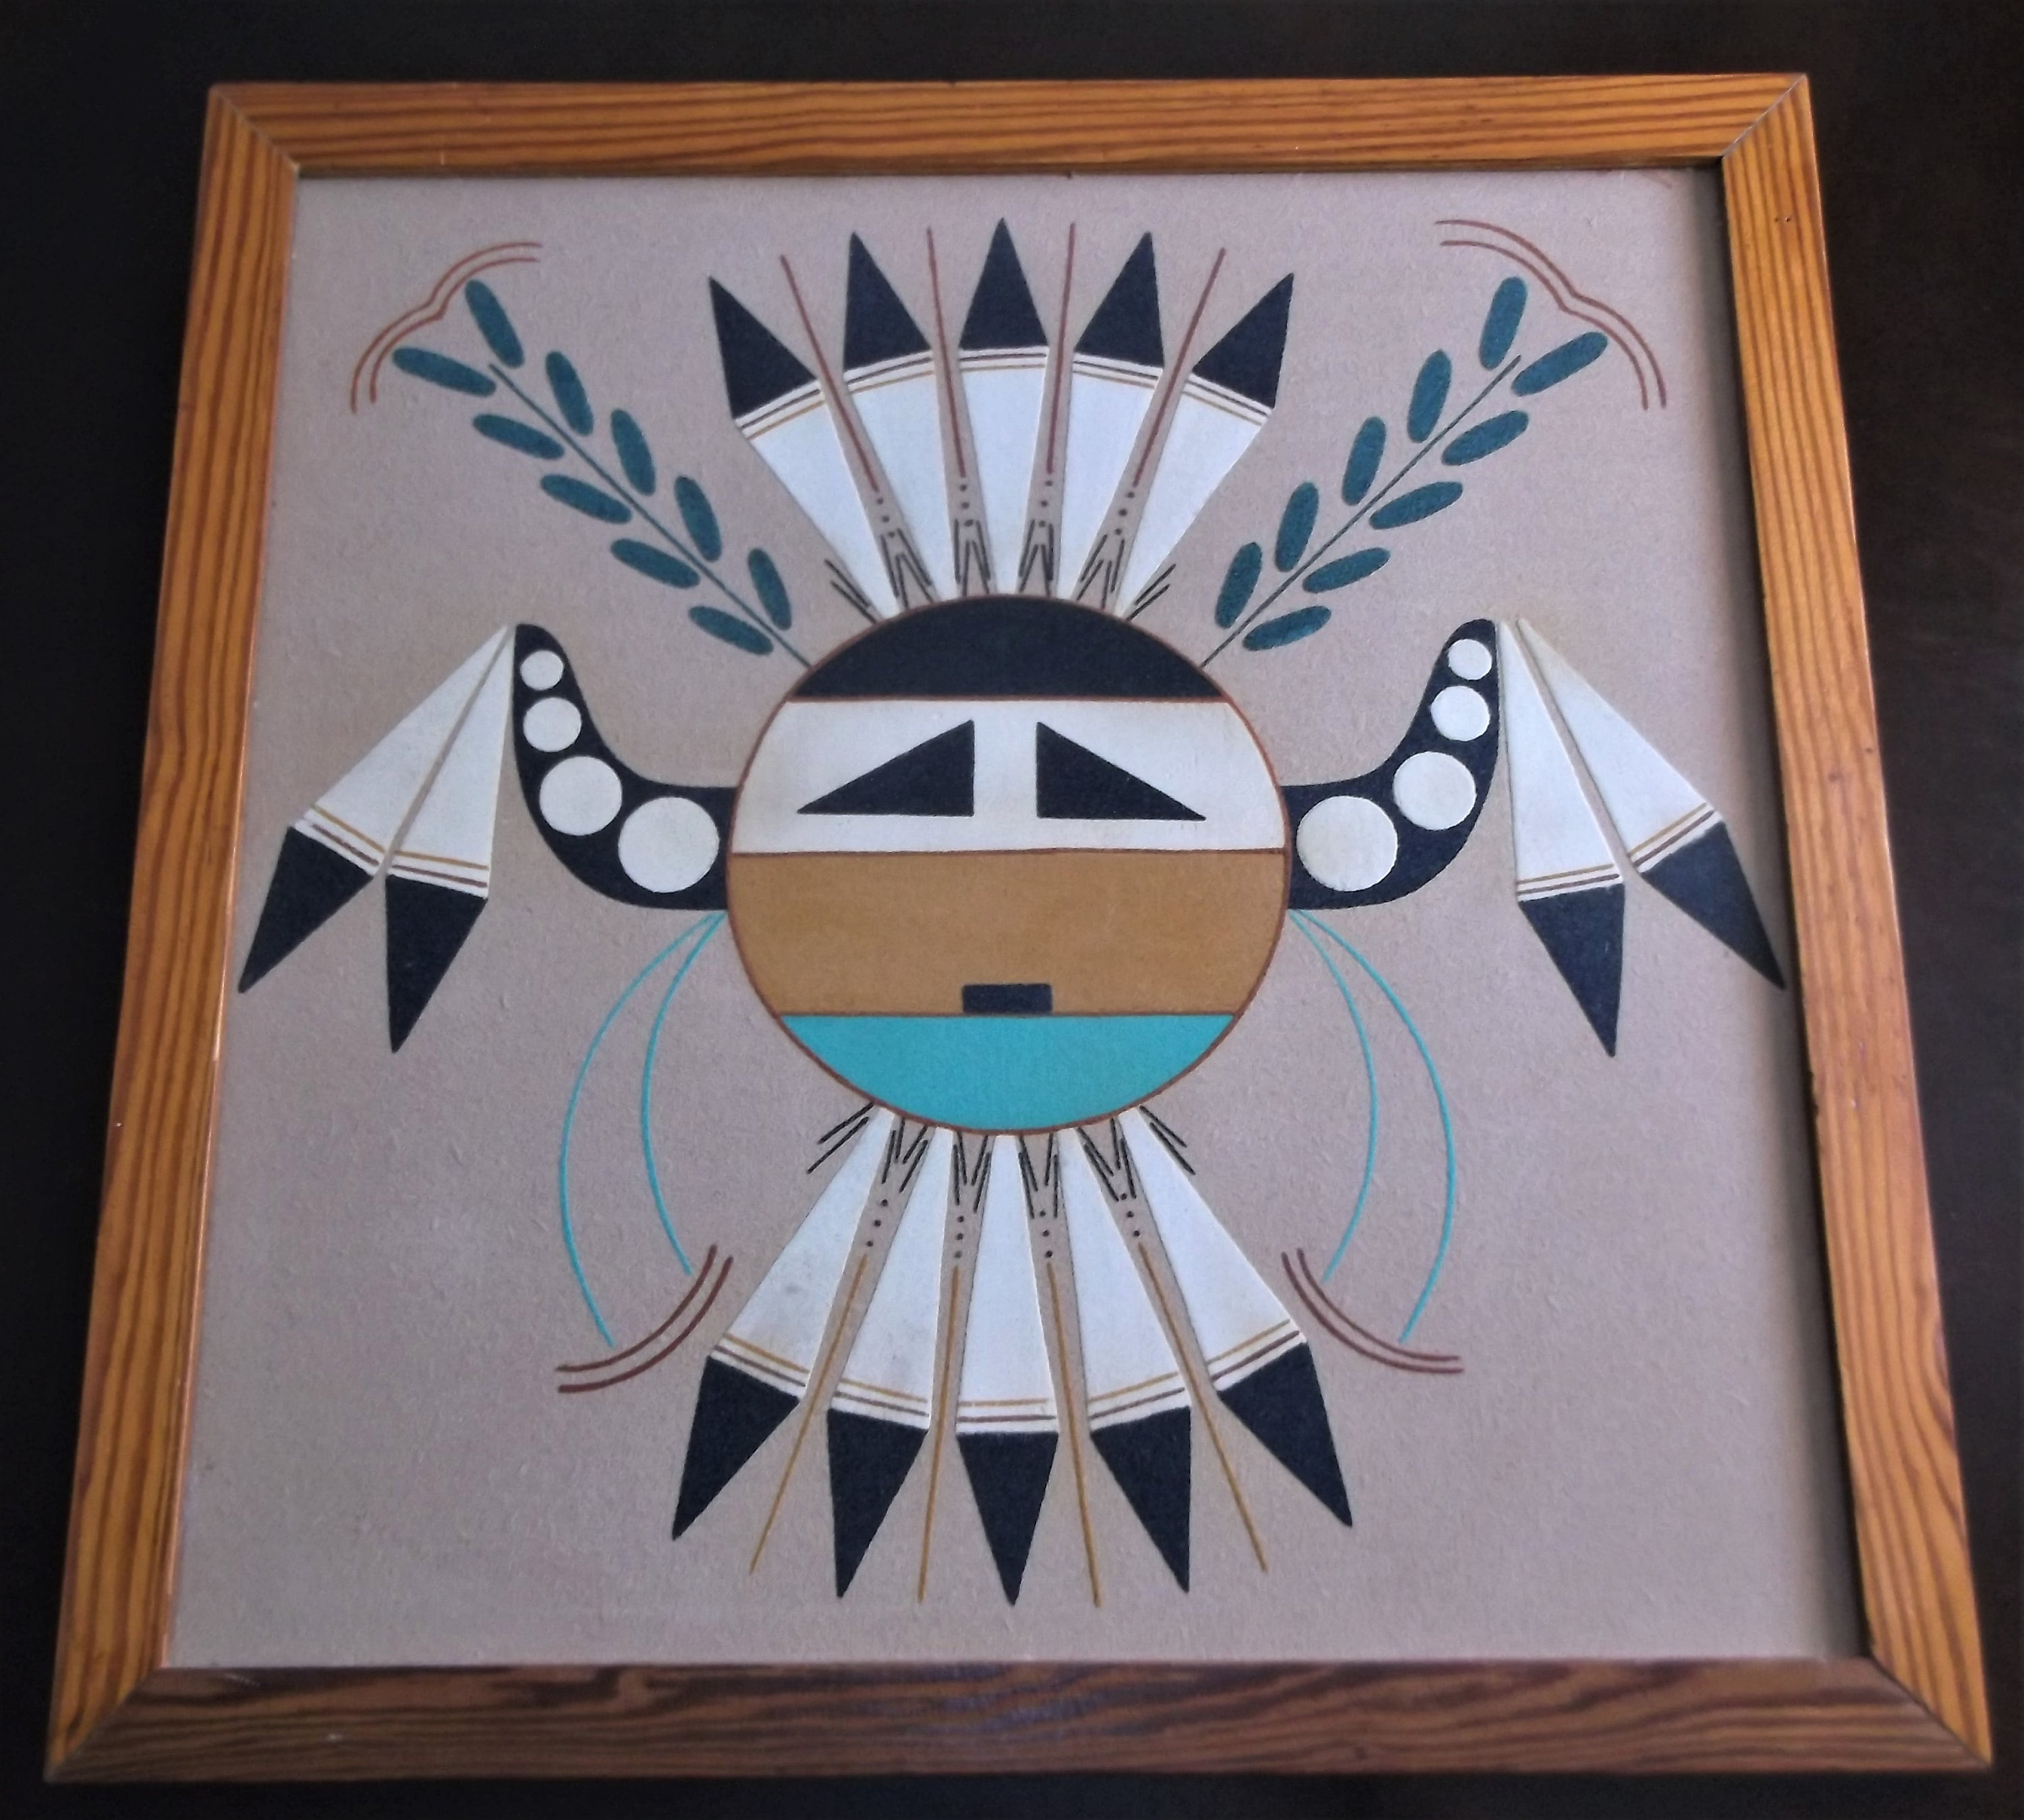 Vintage large by framed navajo sand painting art signed by artist